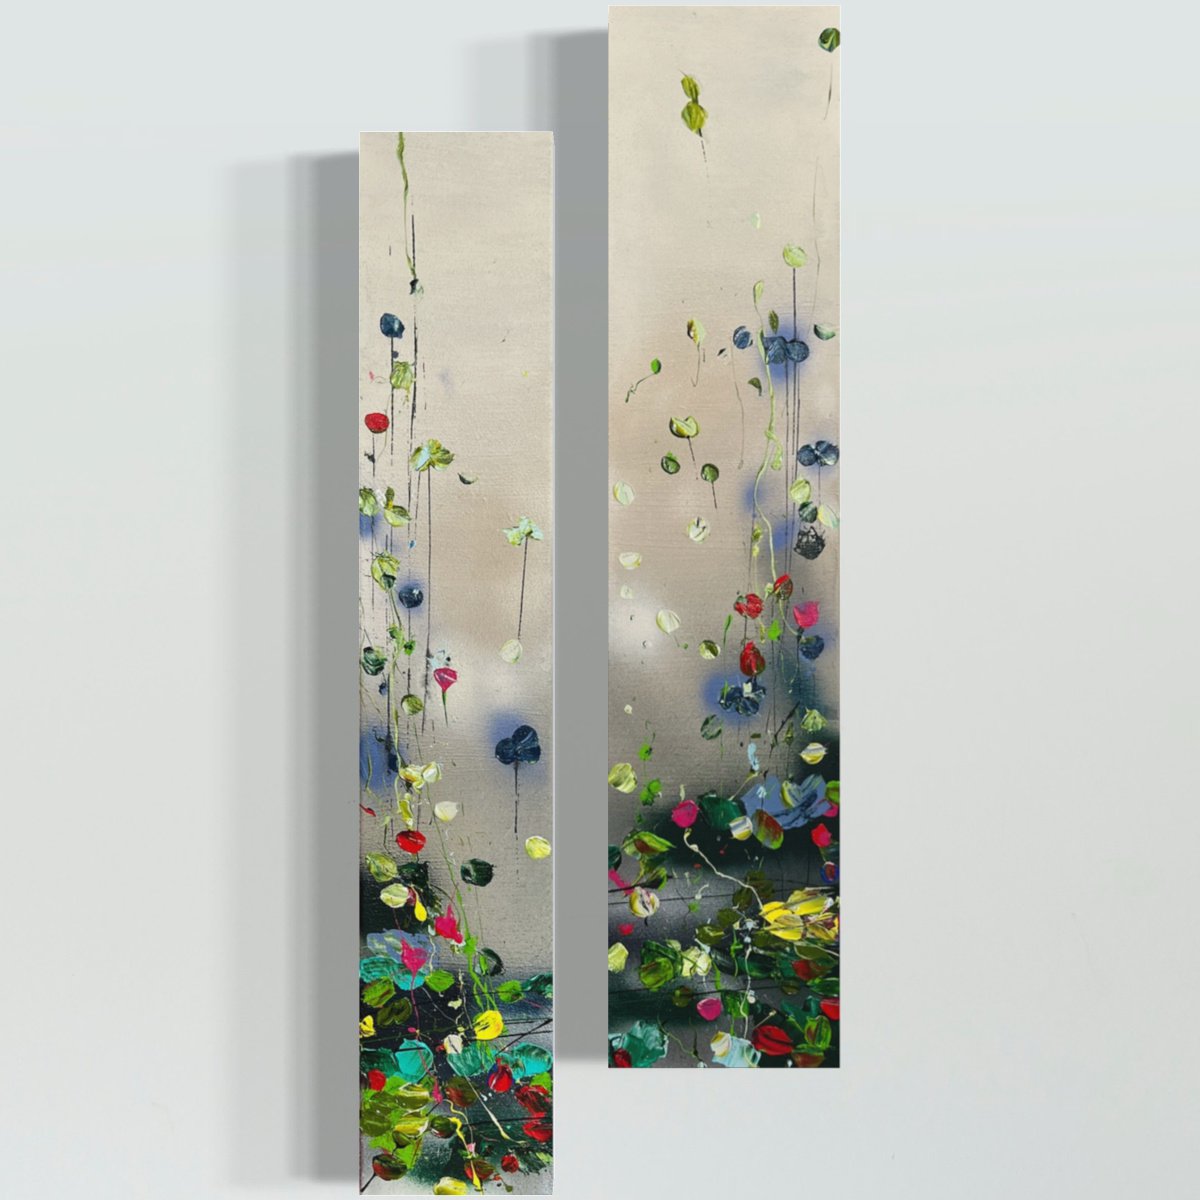 High acrylic artwork diptych with flowers Flowers On The See IV by Anastassia Skopp